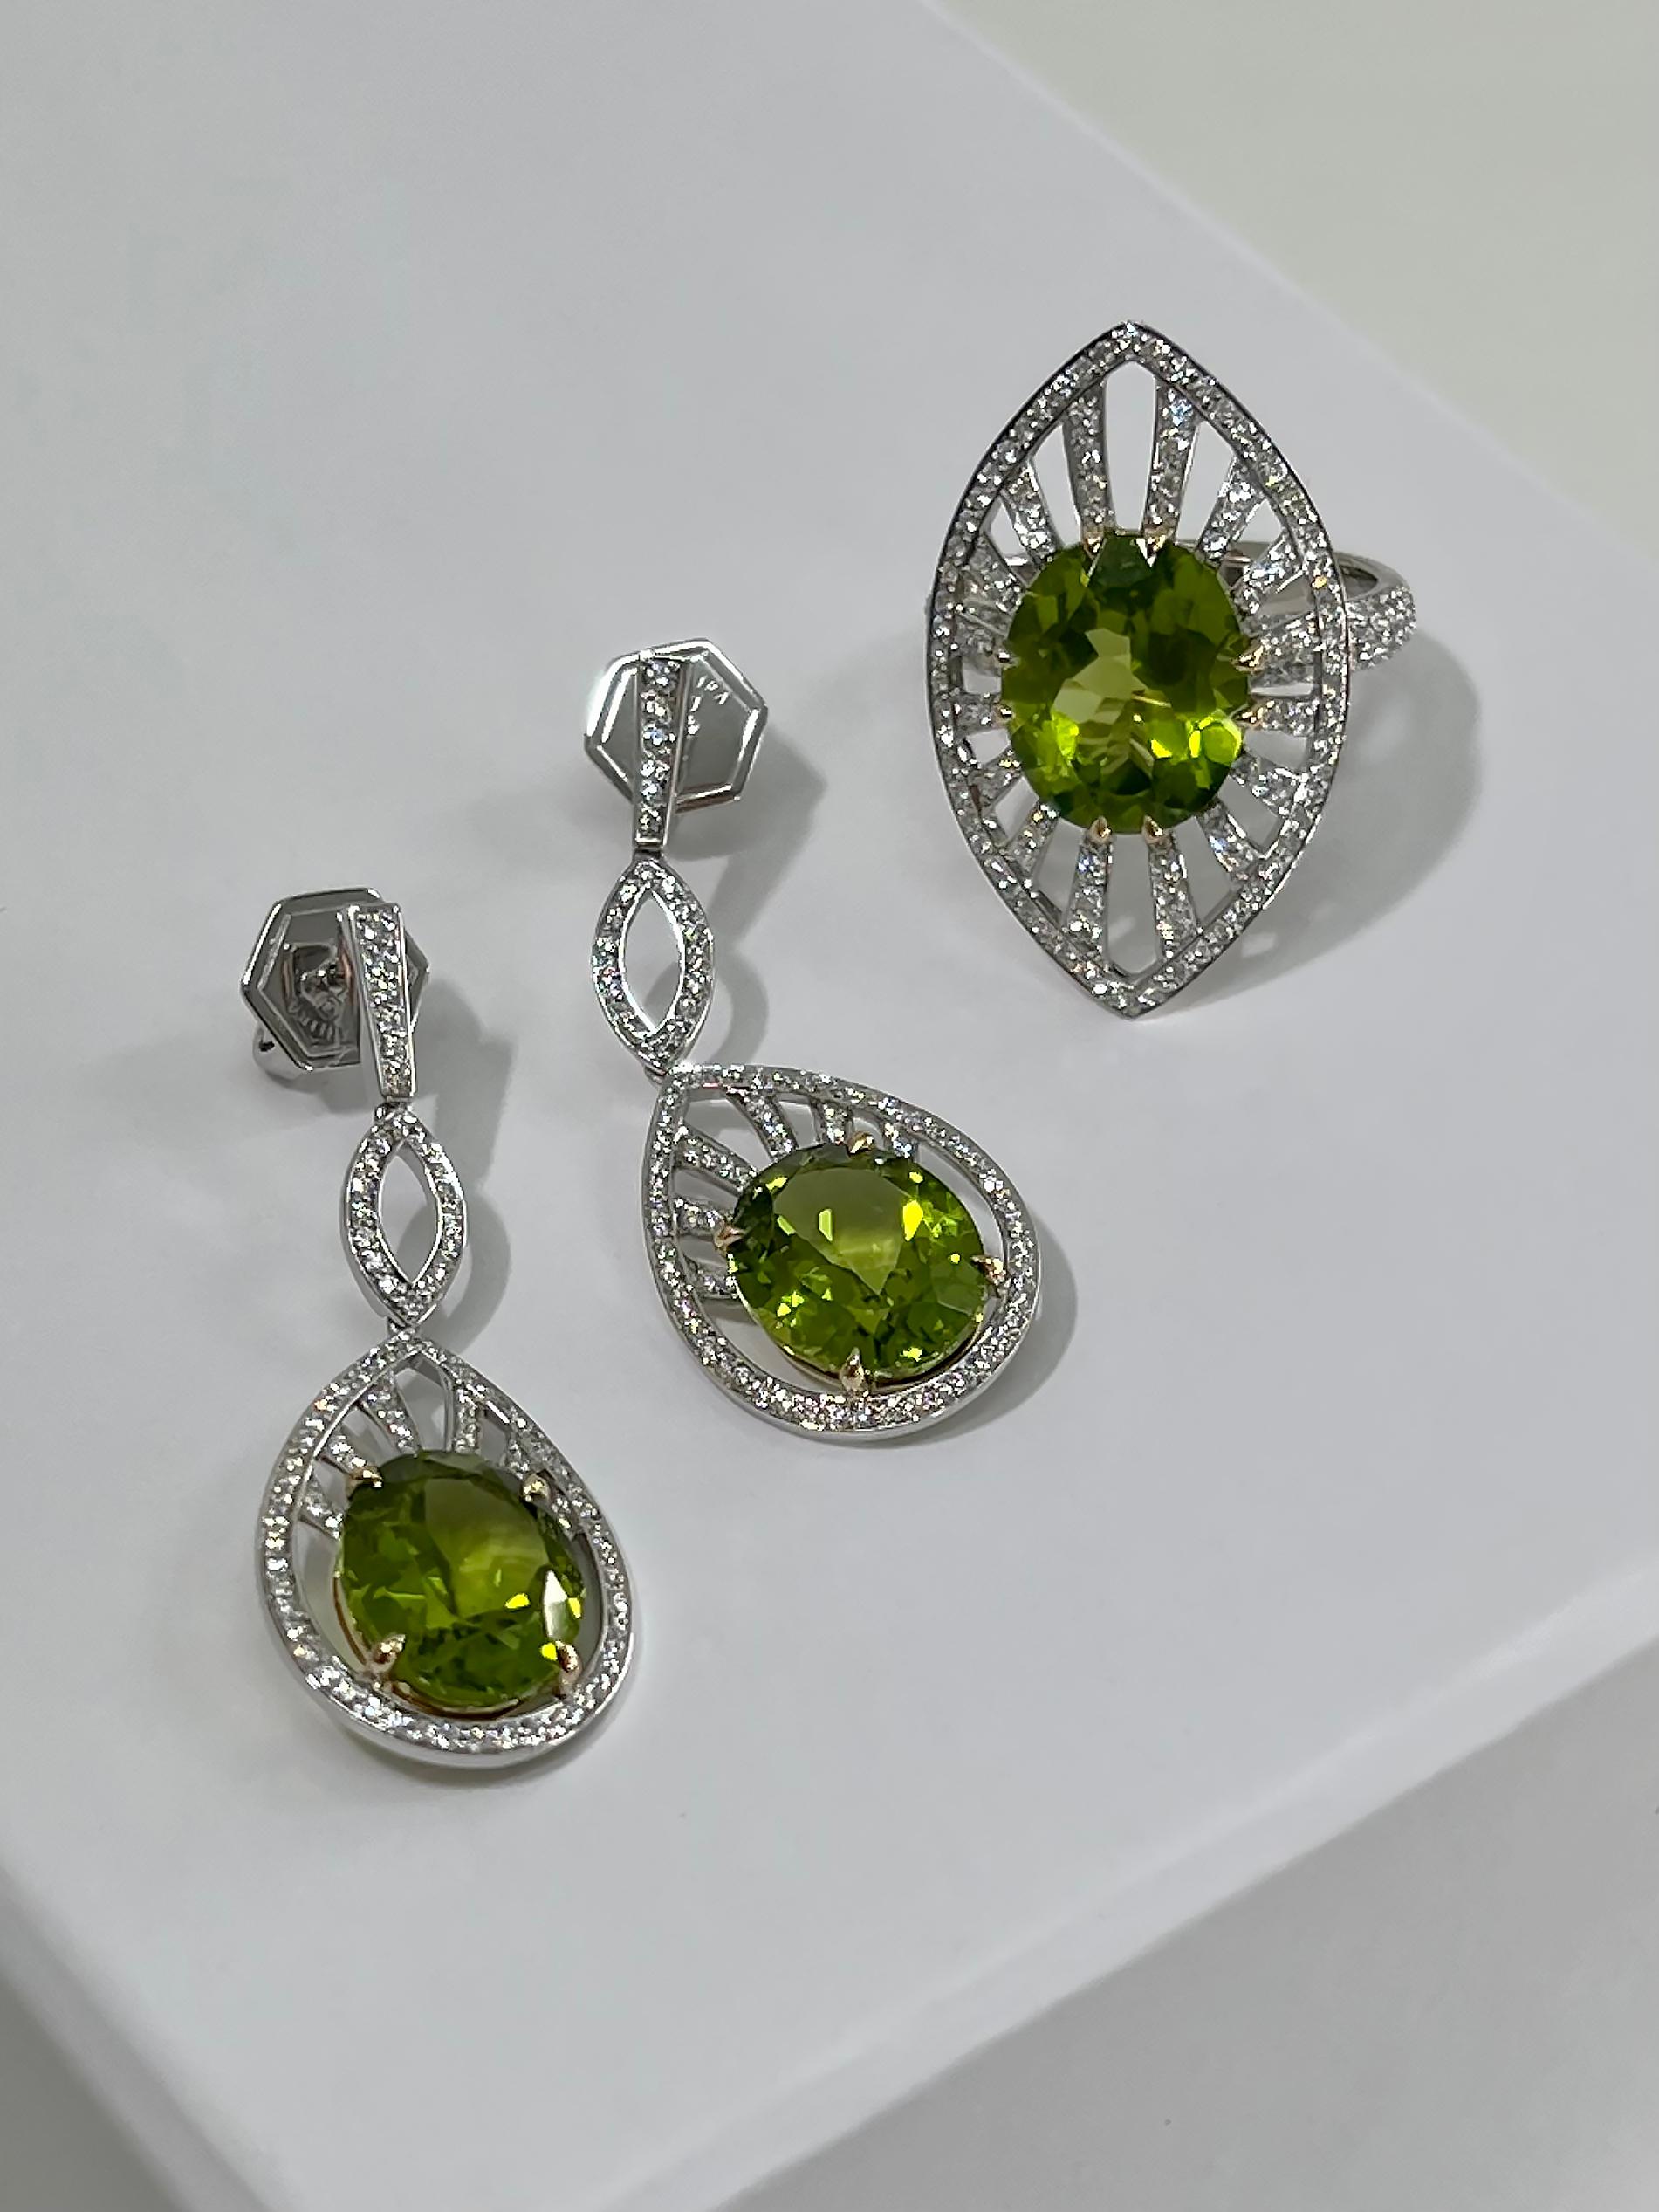 5.15ct Peridot and Diamond Ring in 18K White Gold For Sale 5